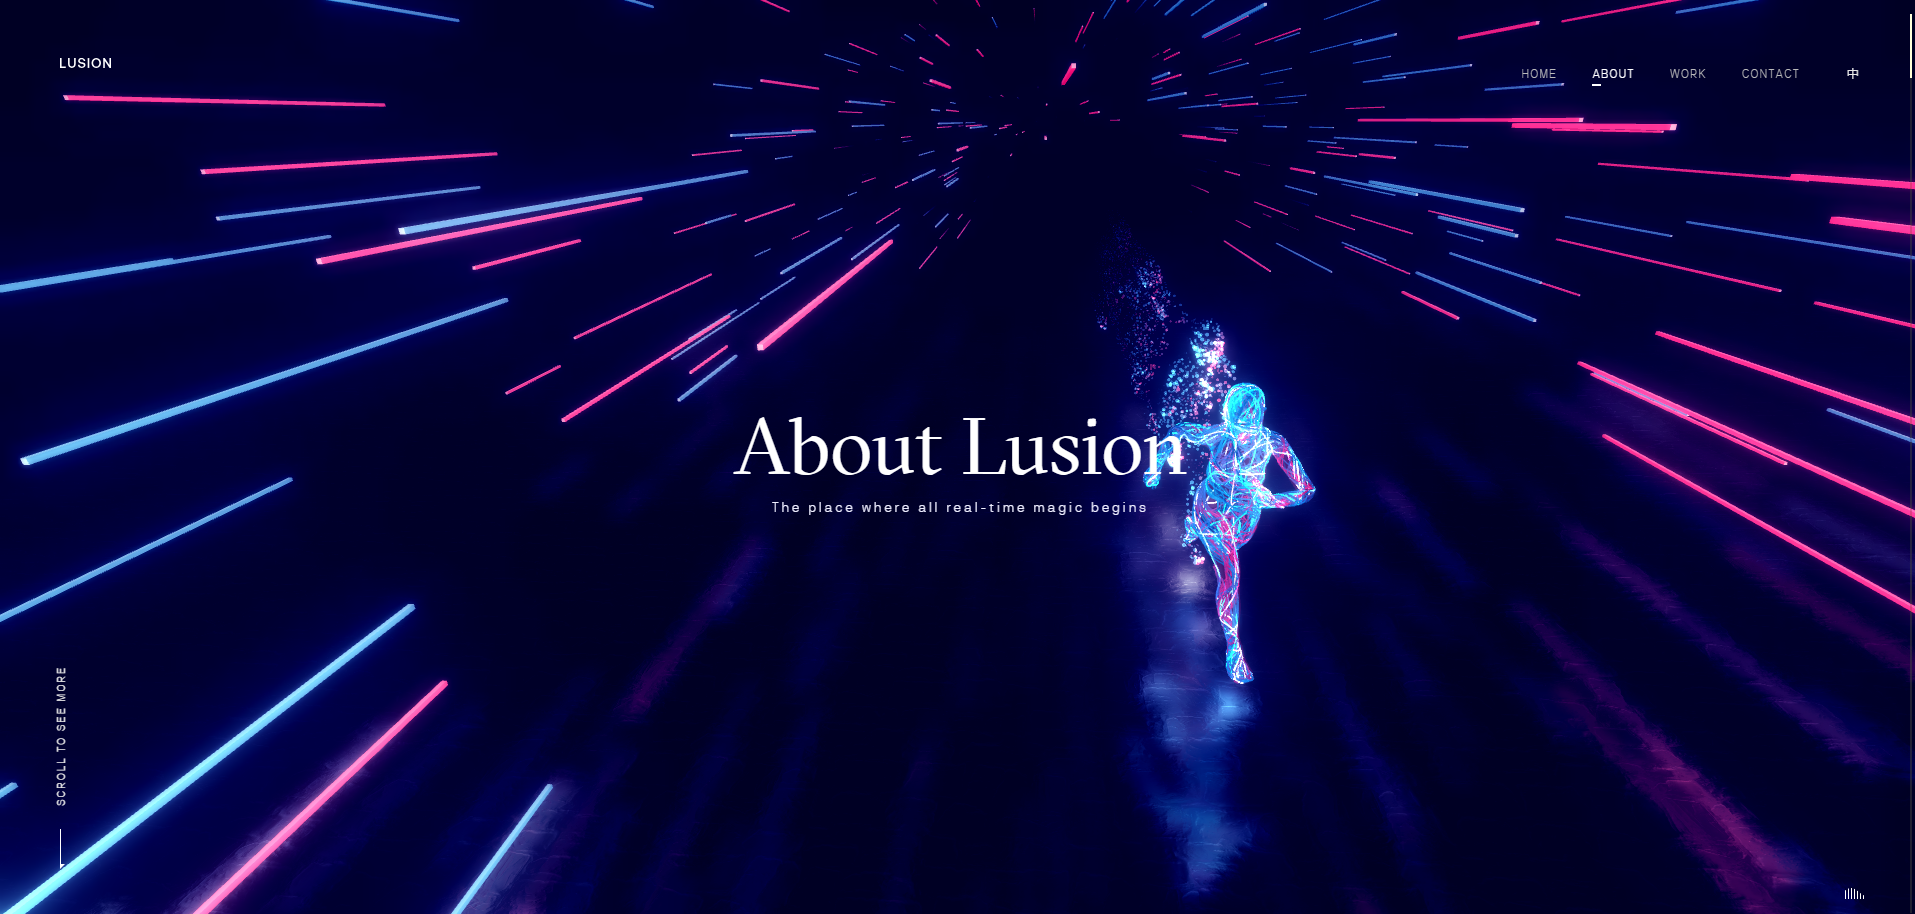 LUSION

     
  
   
  
     
      
  

EN

From creative to production-we-collaborate —
Py hs creative agencies and ESF iv
I Ch gompell ing. real time experiences, TS

yond expectations ———

 

 

   

  

: Eye
[LCR a. LTT ne
SSE LS PrP
CS — CL CRA FETE PT

 

—

vi / AR